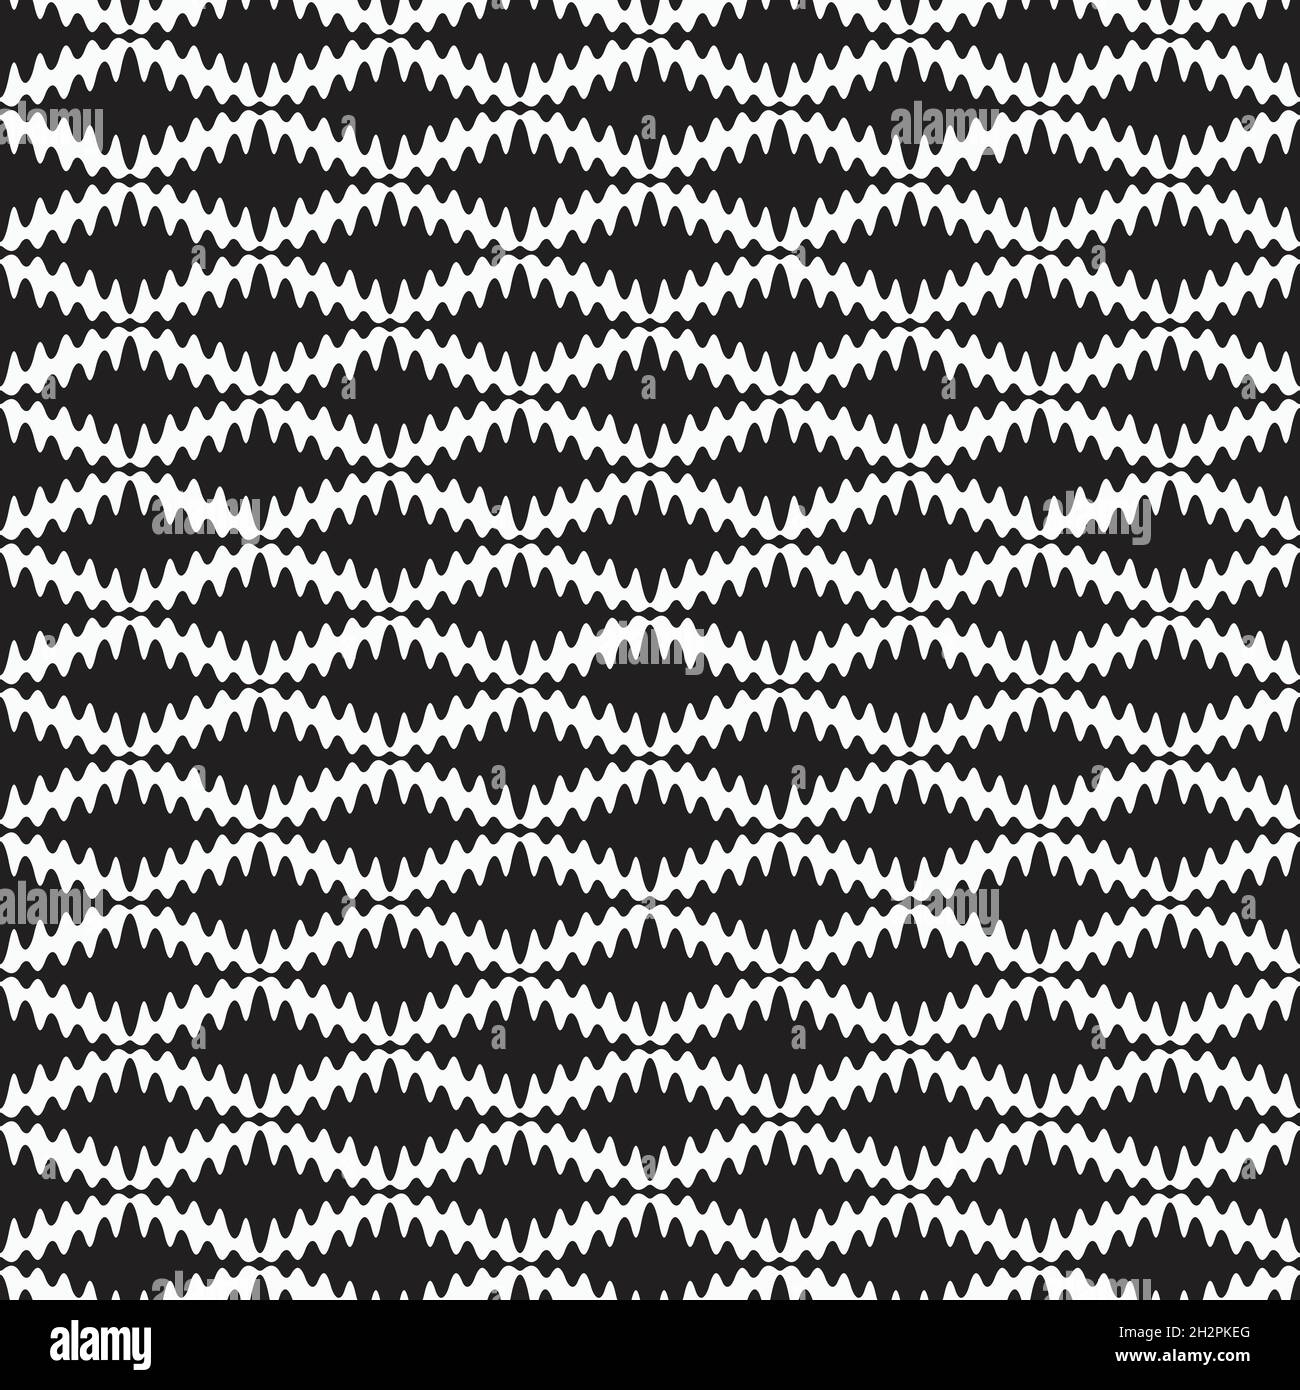 Mesh made of diamond shape geometric elements. Optical black and white design. Modern stylish texture. Seamless repeating pattern. Vector image. Stock Vector